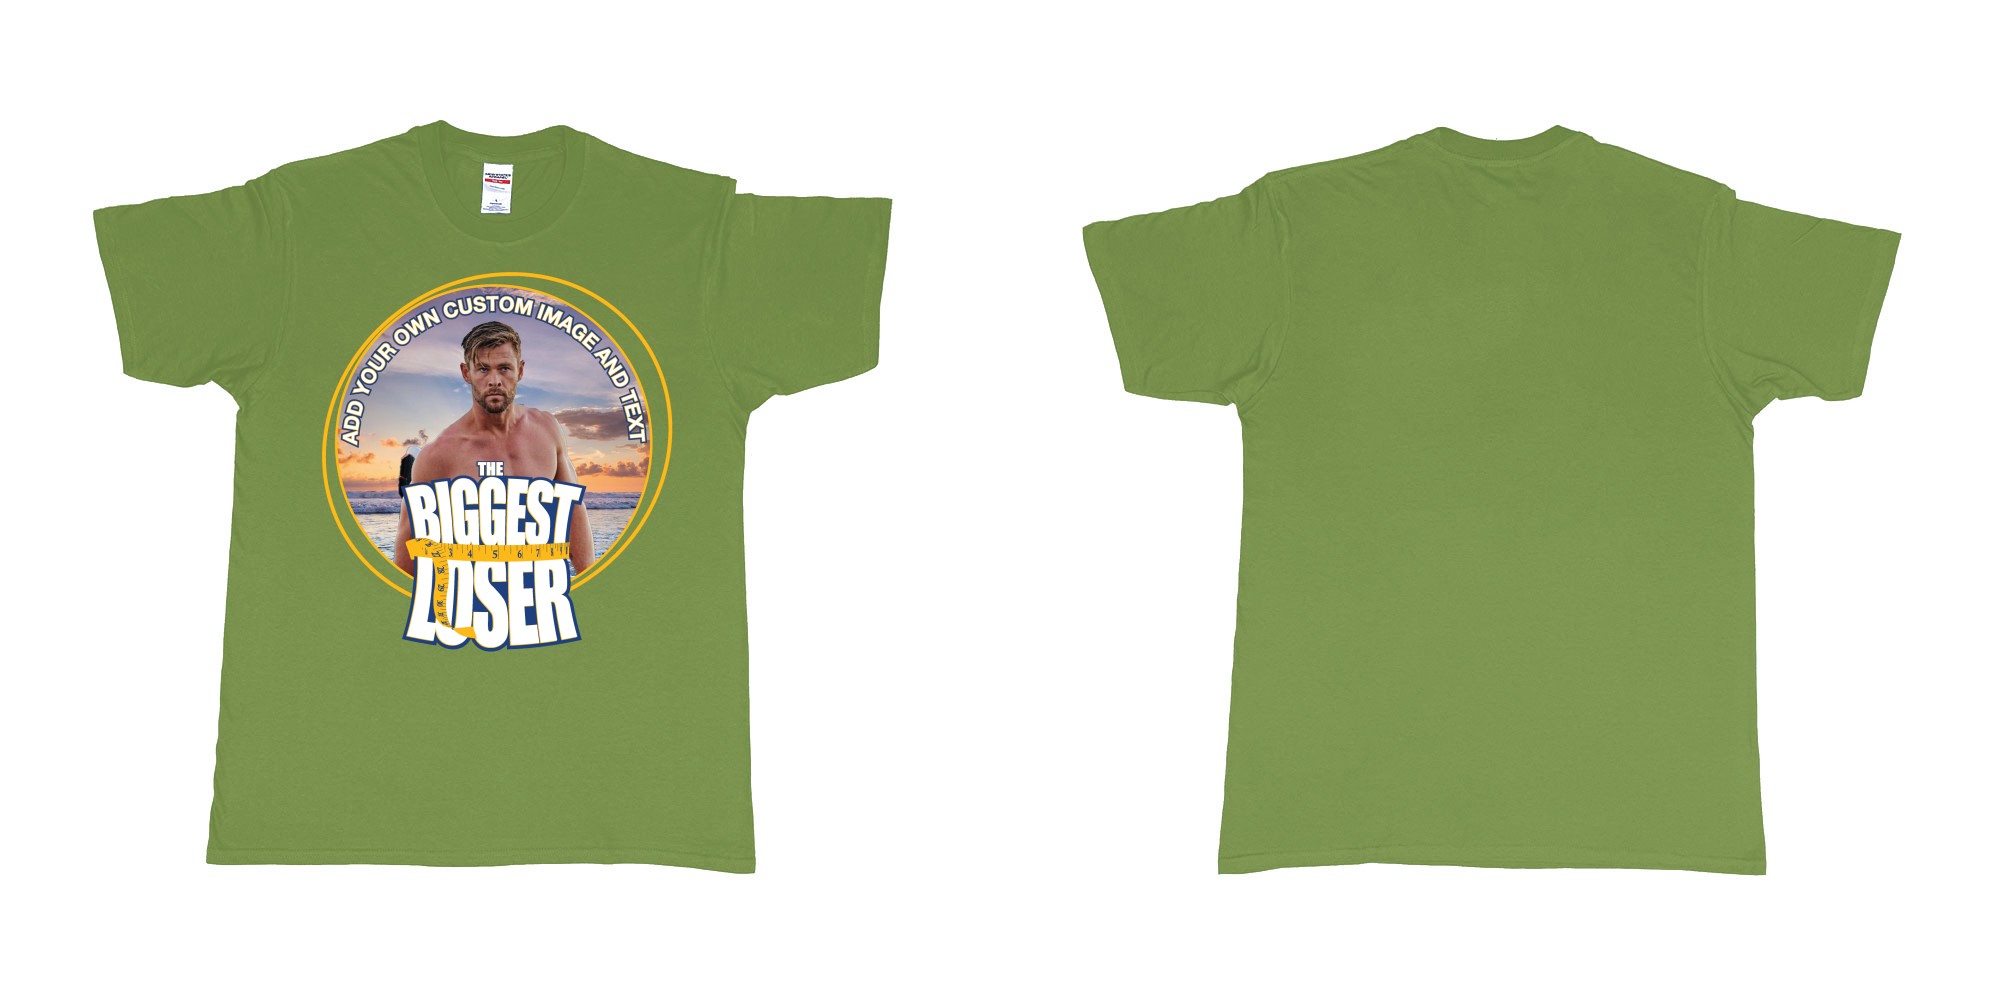 Custom tshirt design the biggest loser logo custom image funny tshirt design in fabric color military-green choice your own text made in Bali by The Pirate Way